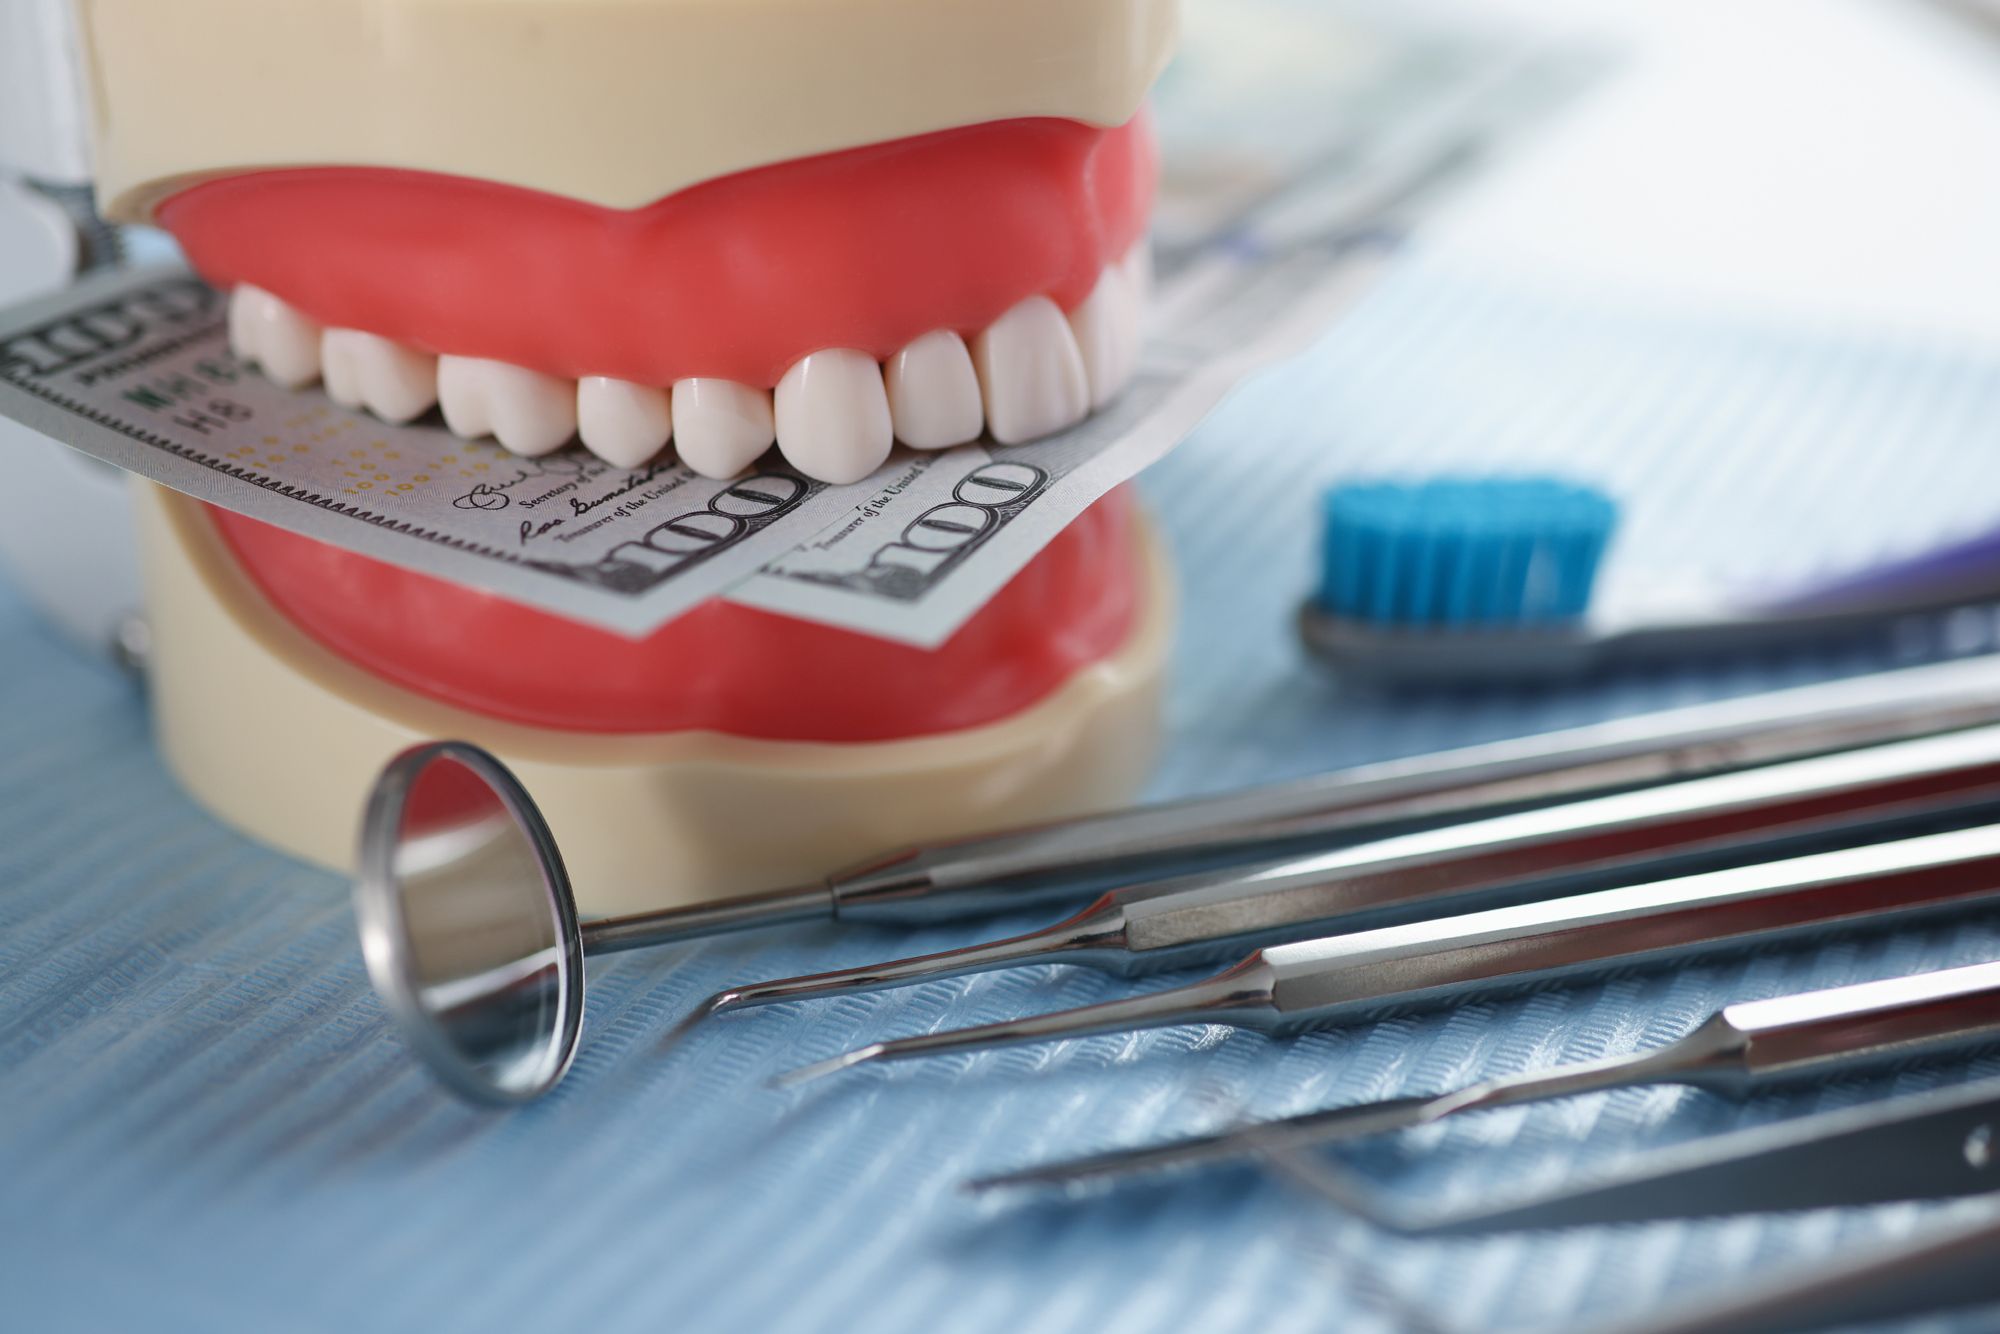 Dental Procedure Coding Update: What Your Practice Should Know for 2022 by Terri Lively